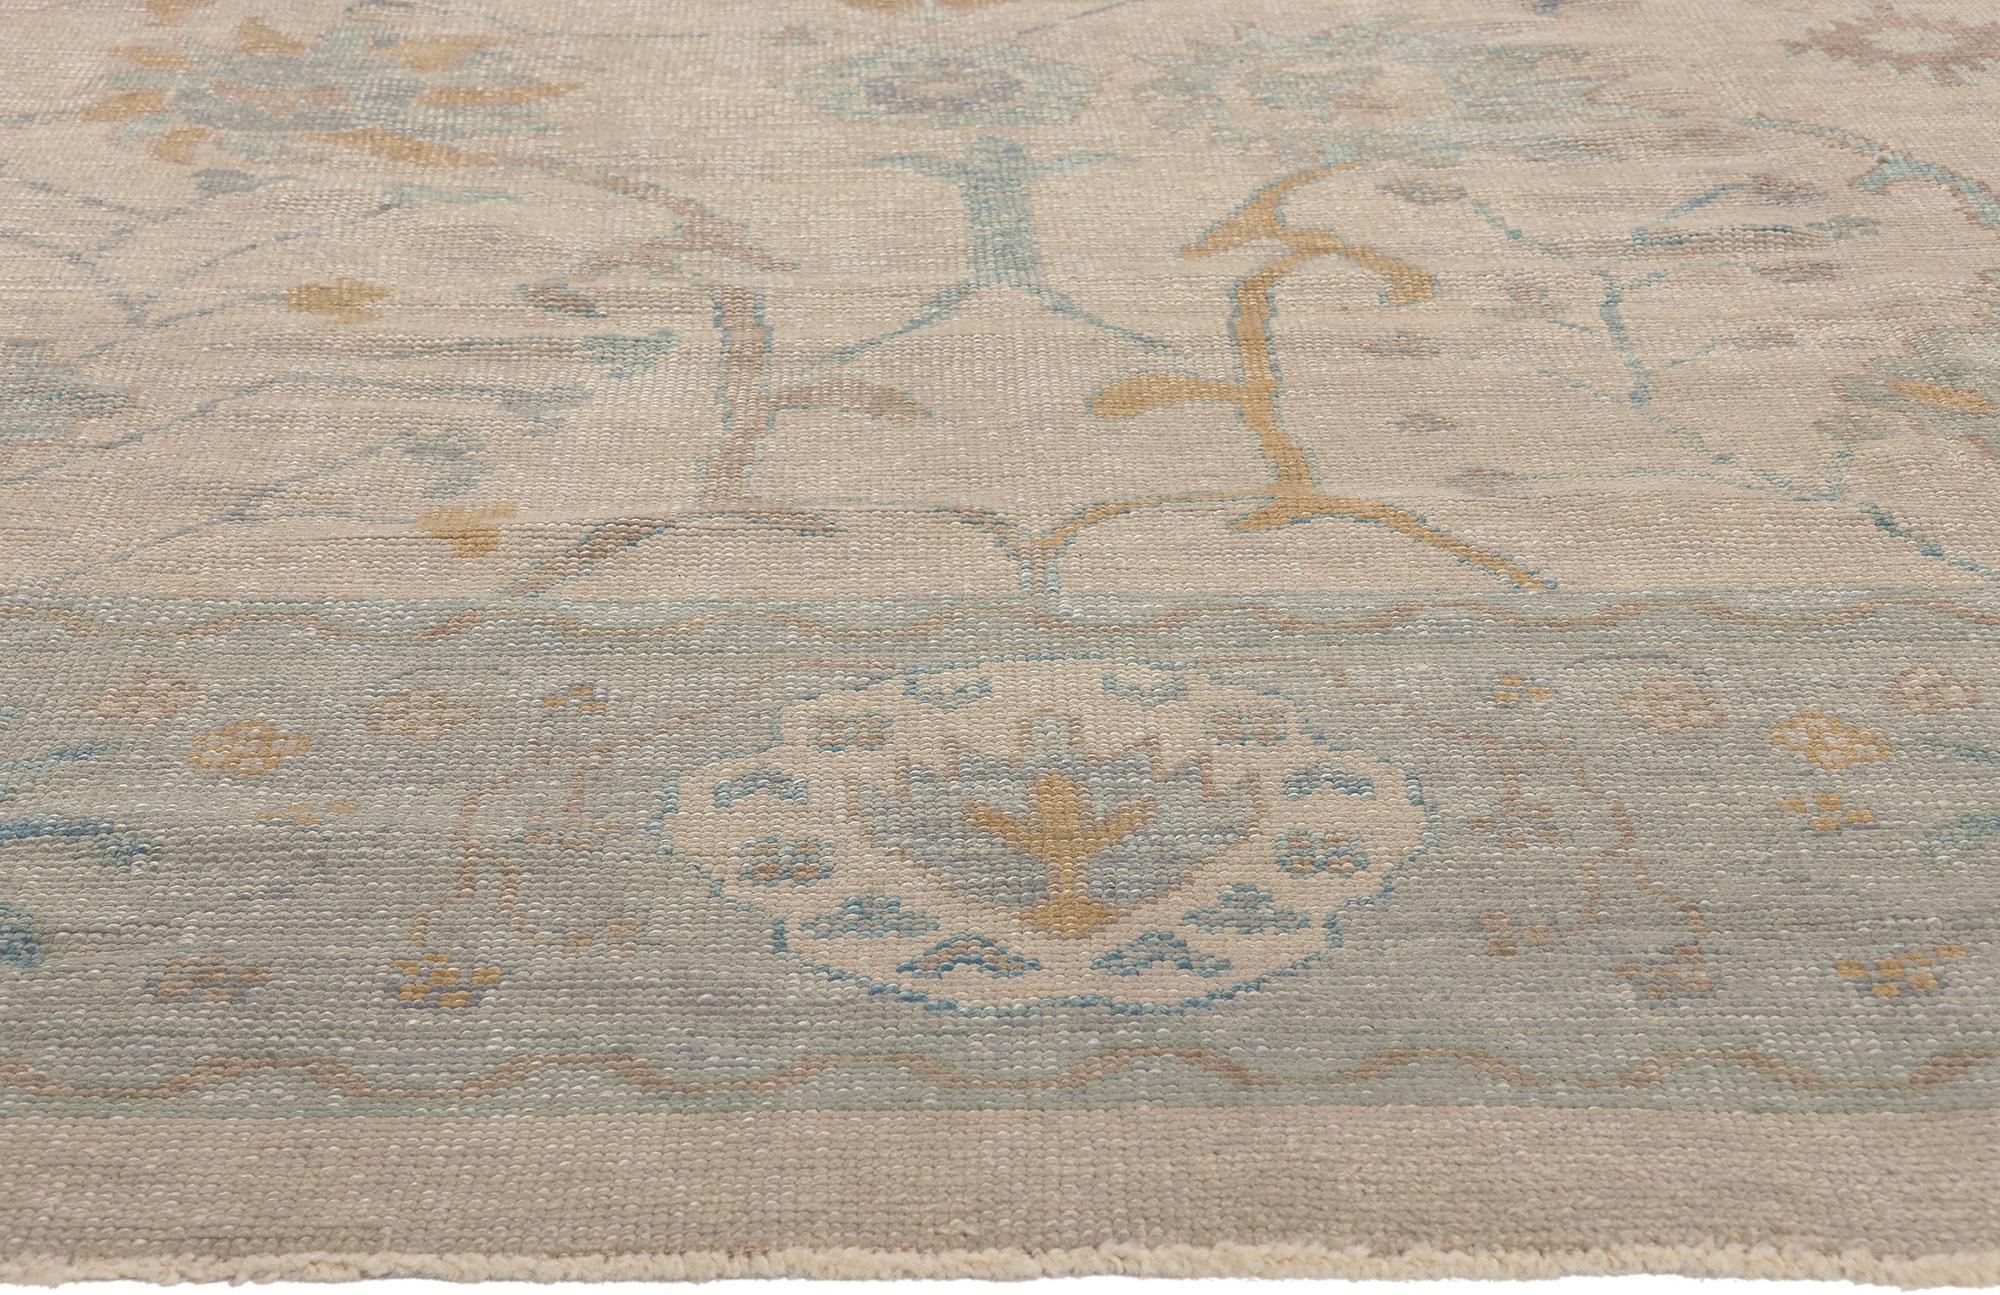 Modern Oushak Turkish Rug, Biophilic Design Meets Quiet Luxury In New Condition For Sale In Dallas, TX